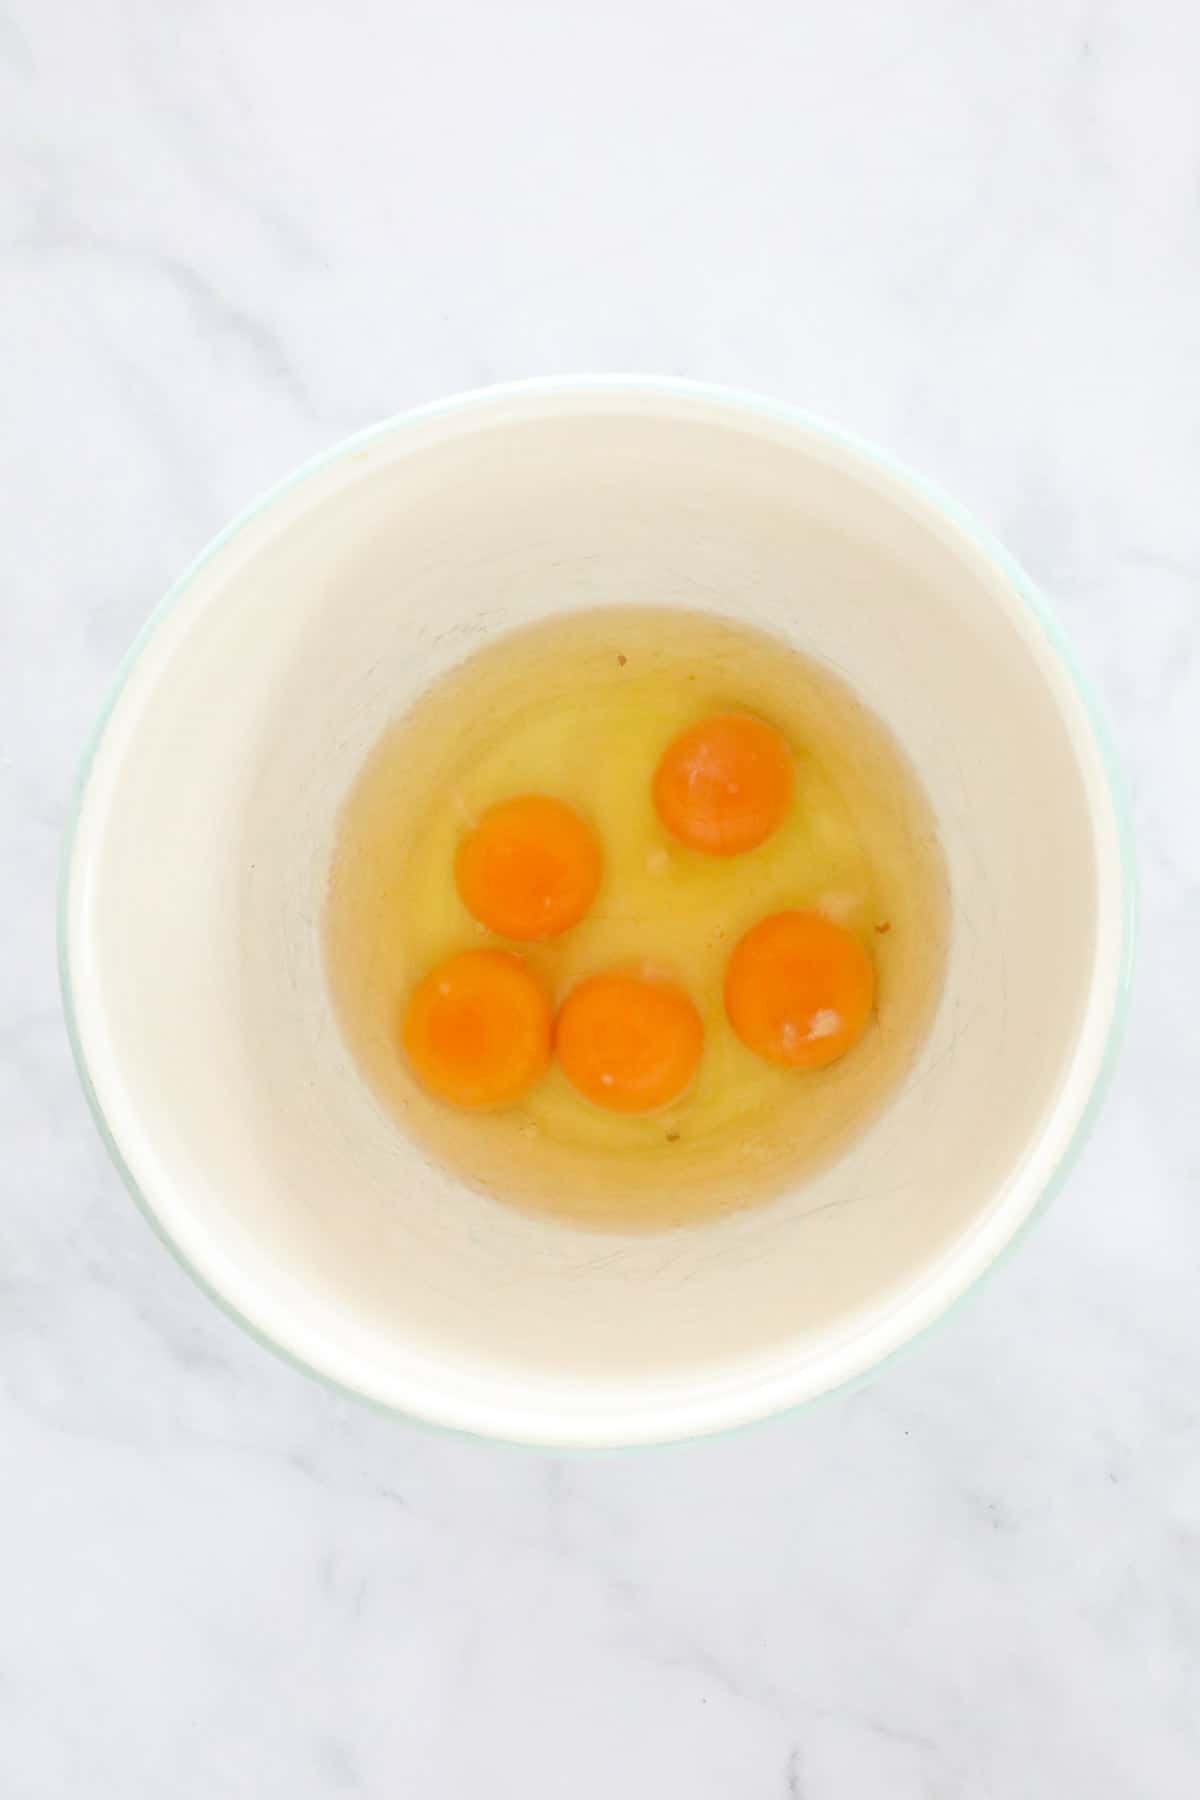 The 5 eggs in a mixing bowl.